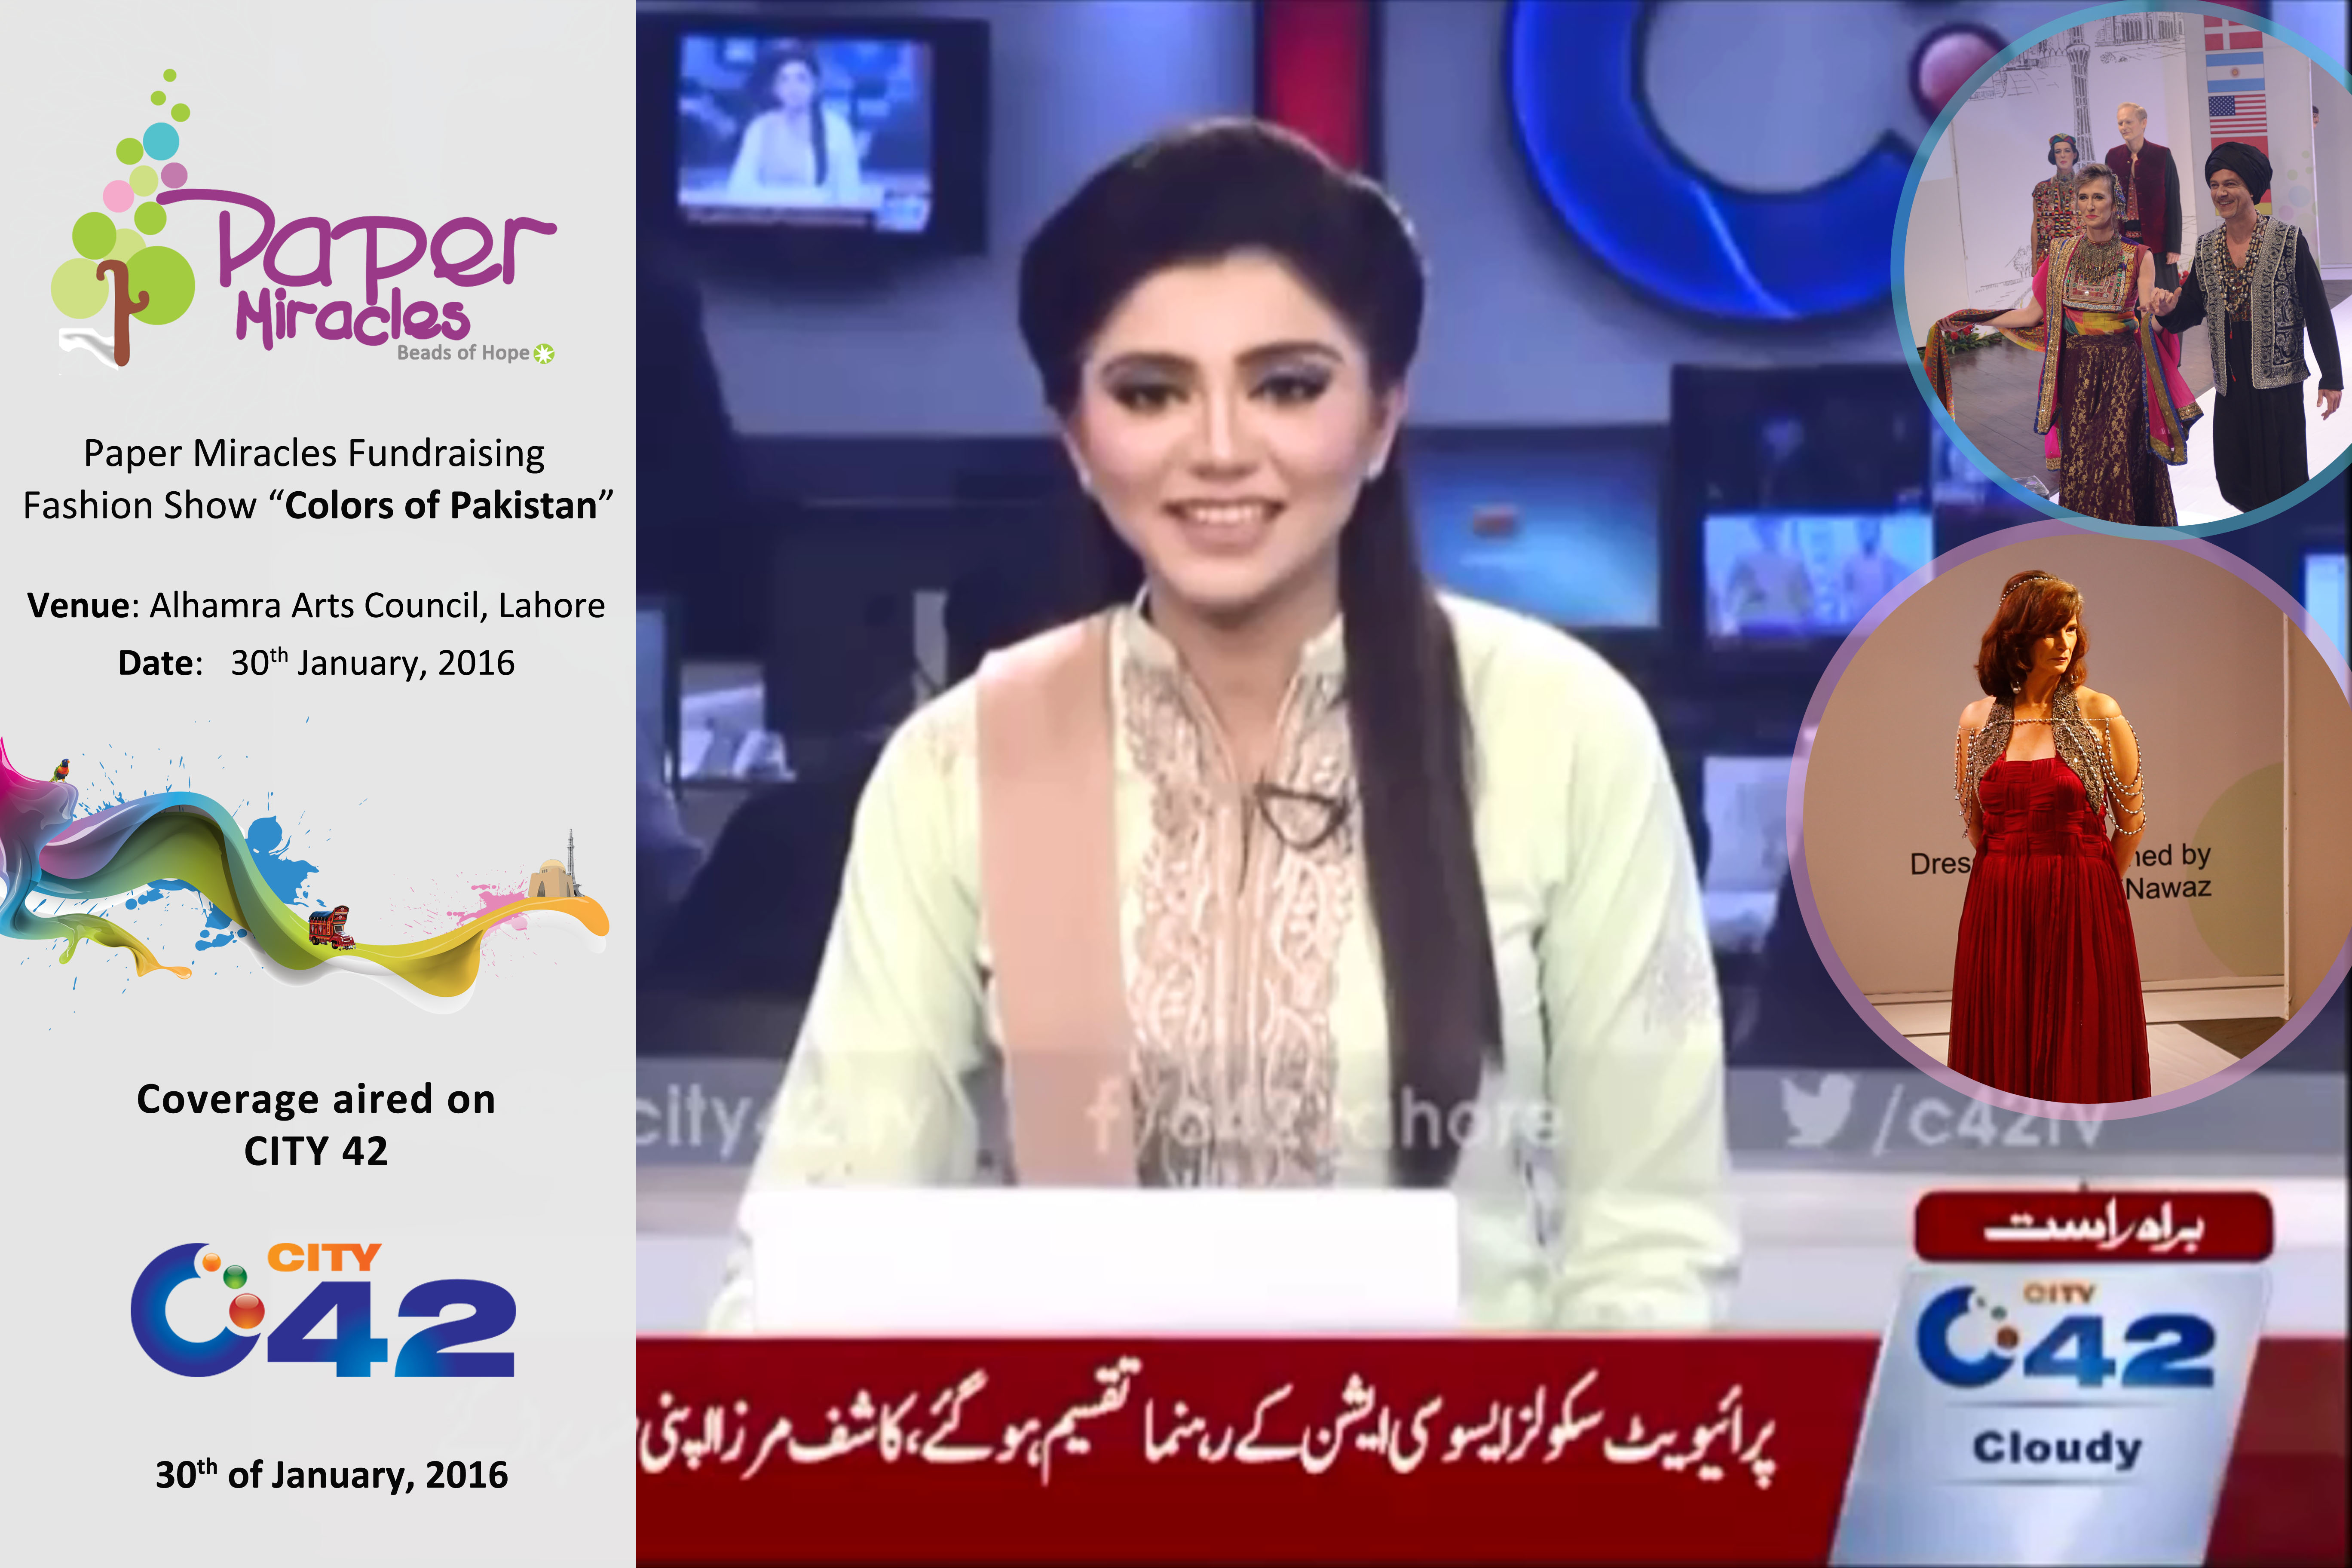 Fundraising fashion show – “Colors of Pakistan” coverage aired on C42 channel